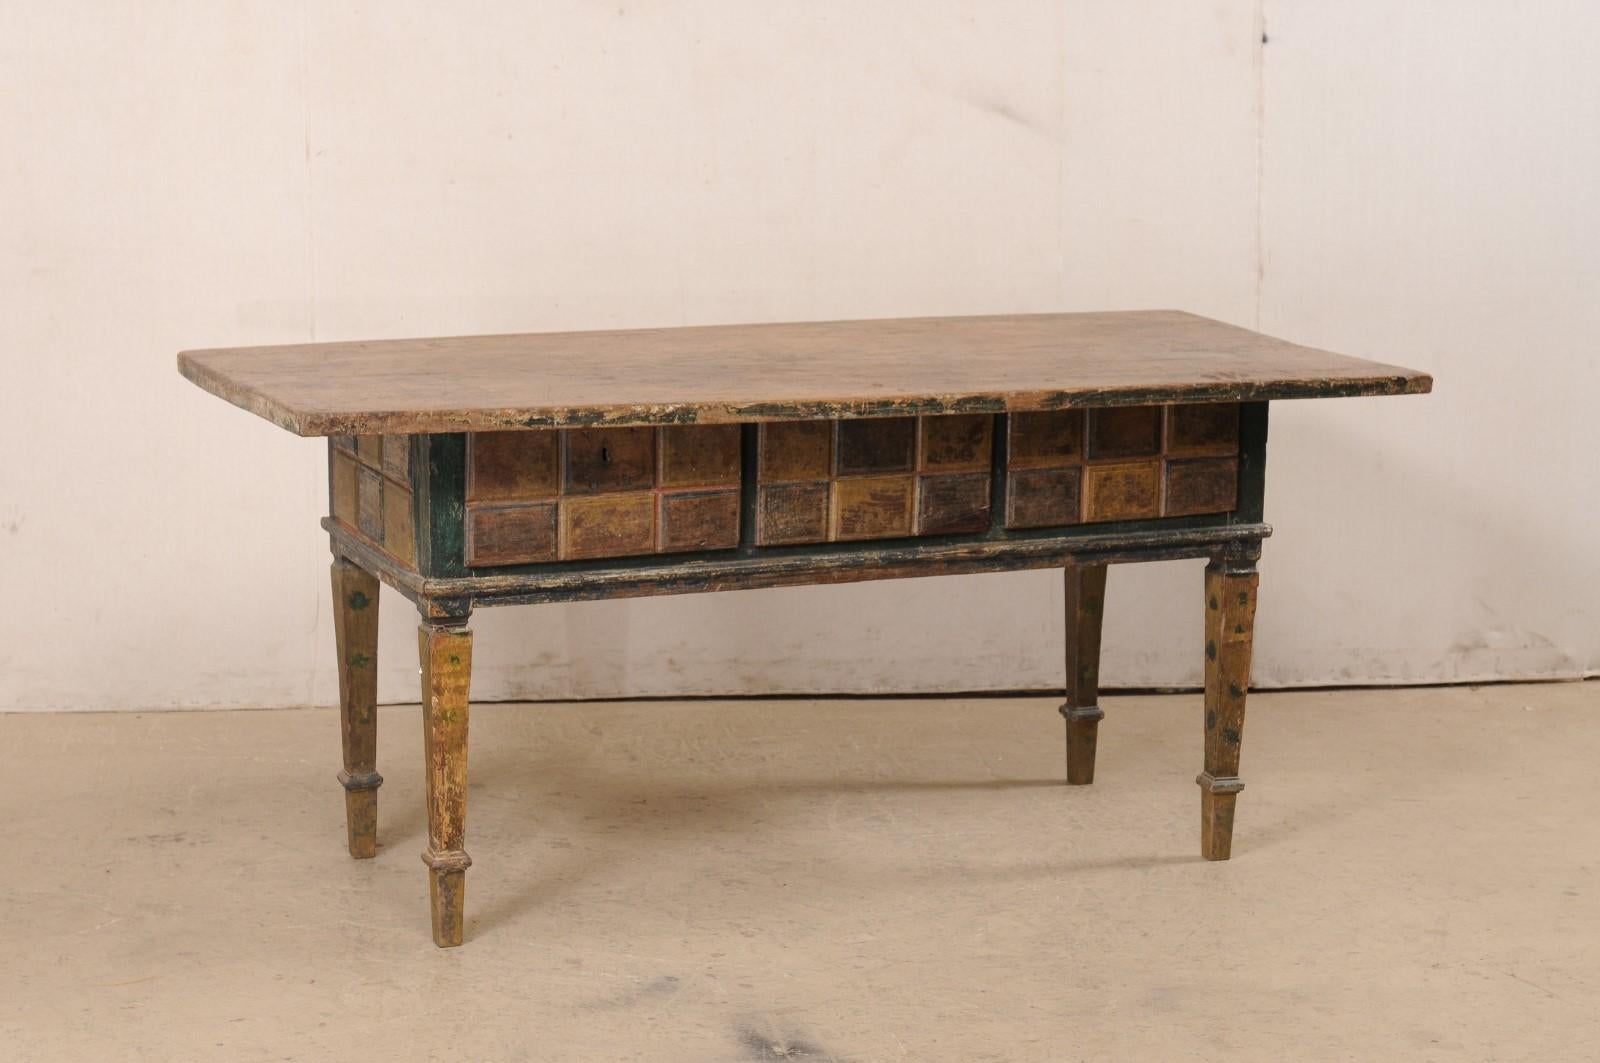 A Spanish carved and painted wood table with drawers from the 19th century (possibly older). This antique table from Spain is very unique and quite lovely with its rustic wood top which overhangs a deeply set apron adorn on all sides in carved